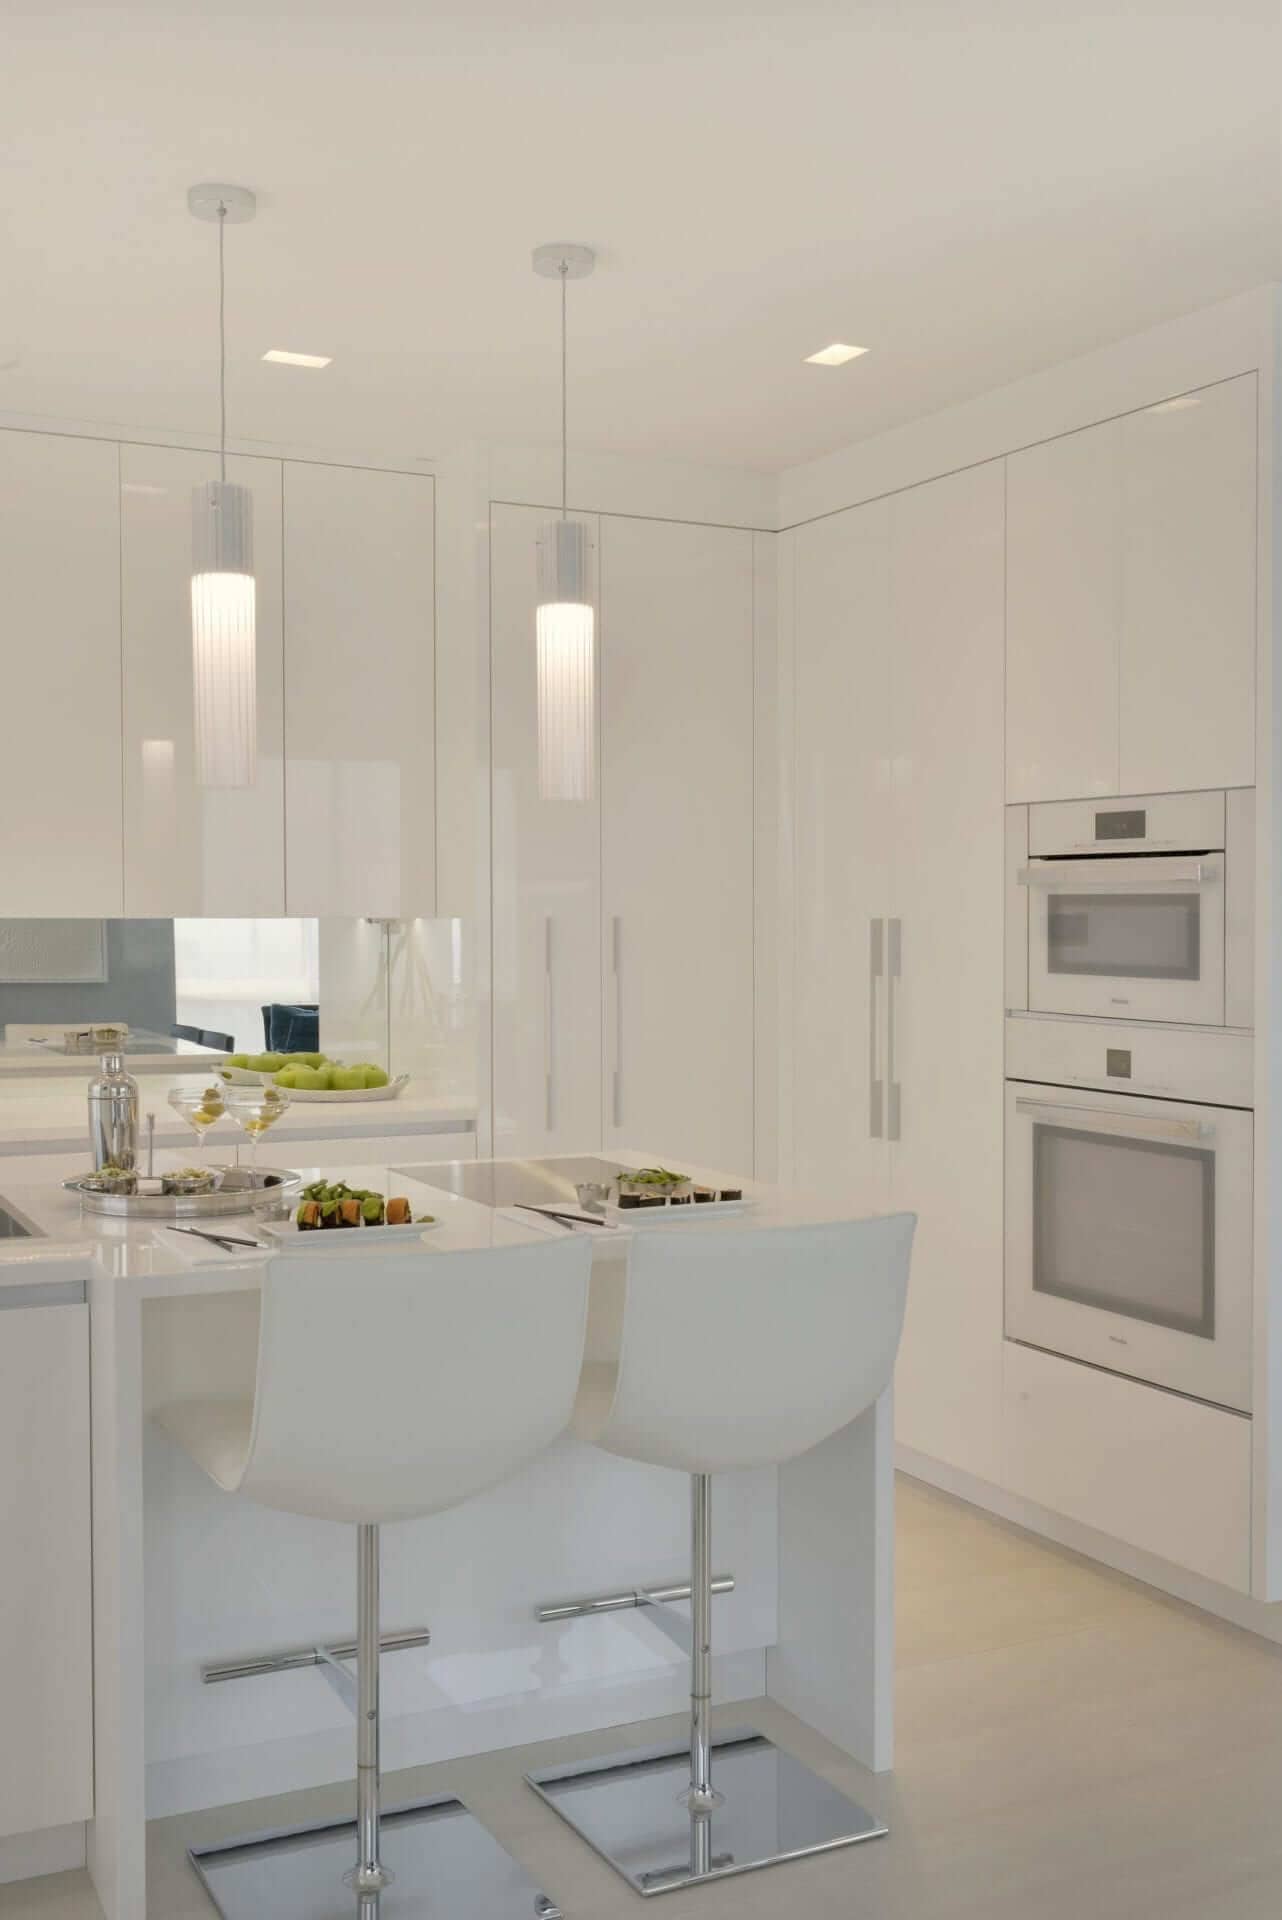 Island seating area in contemporary all-white kitchen features dramatic pendant lights and white Corian countertop with waterfall edge.